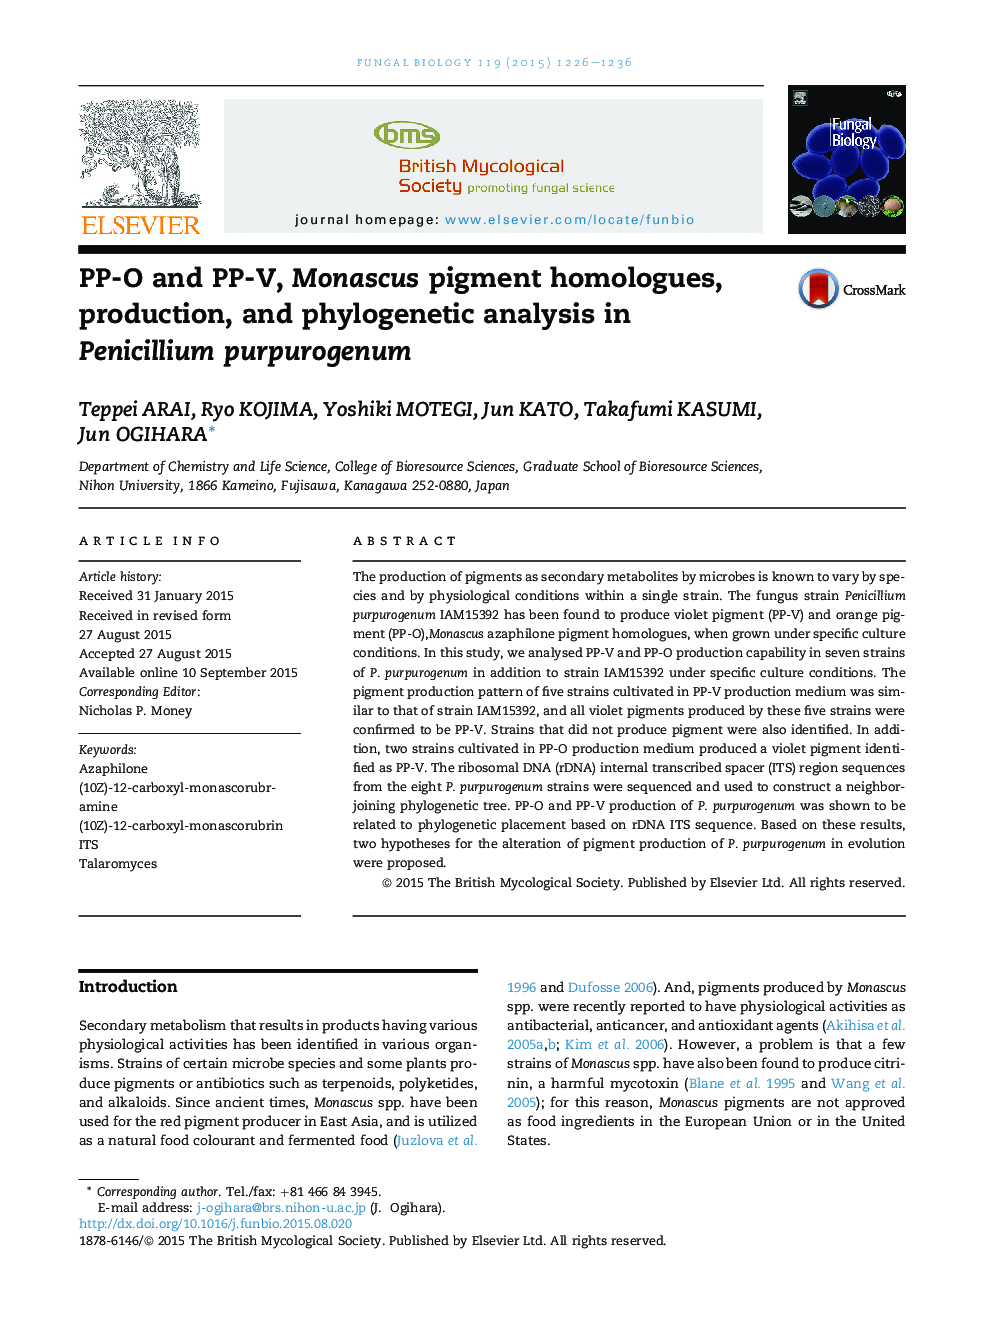 PP-O and PP-V, Monascus pigment homologues, production, and phylogenetic analysis in Penicillium purpurogenum